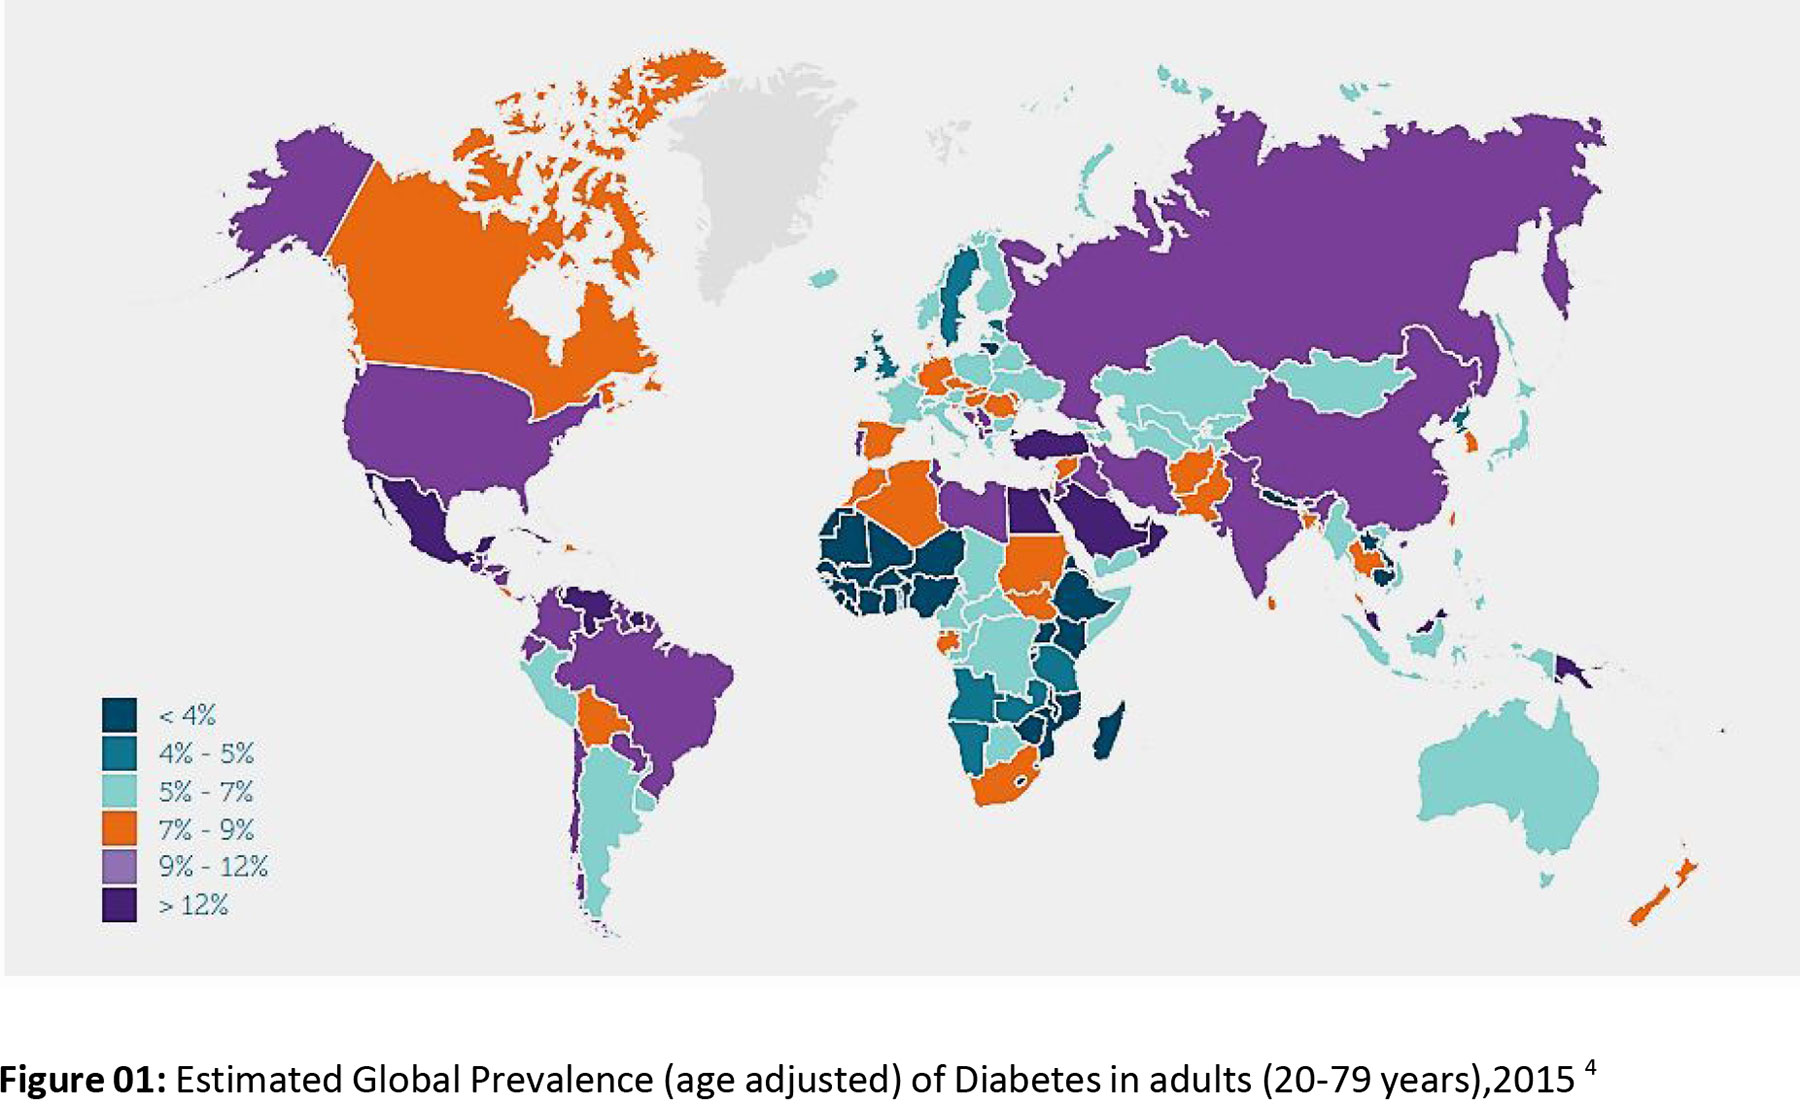 Estimated Global Prevalence of diabetes in adults 2015 